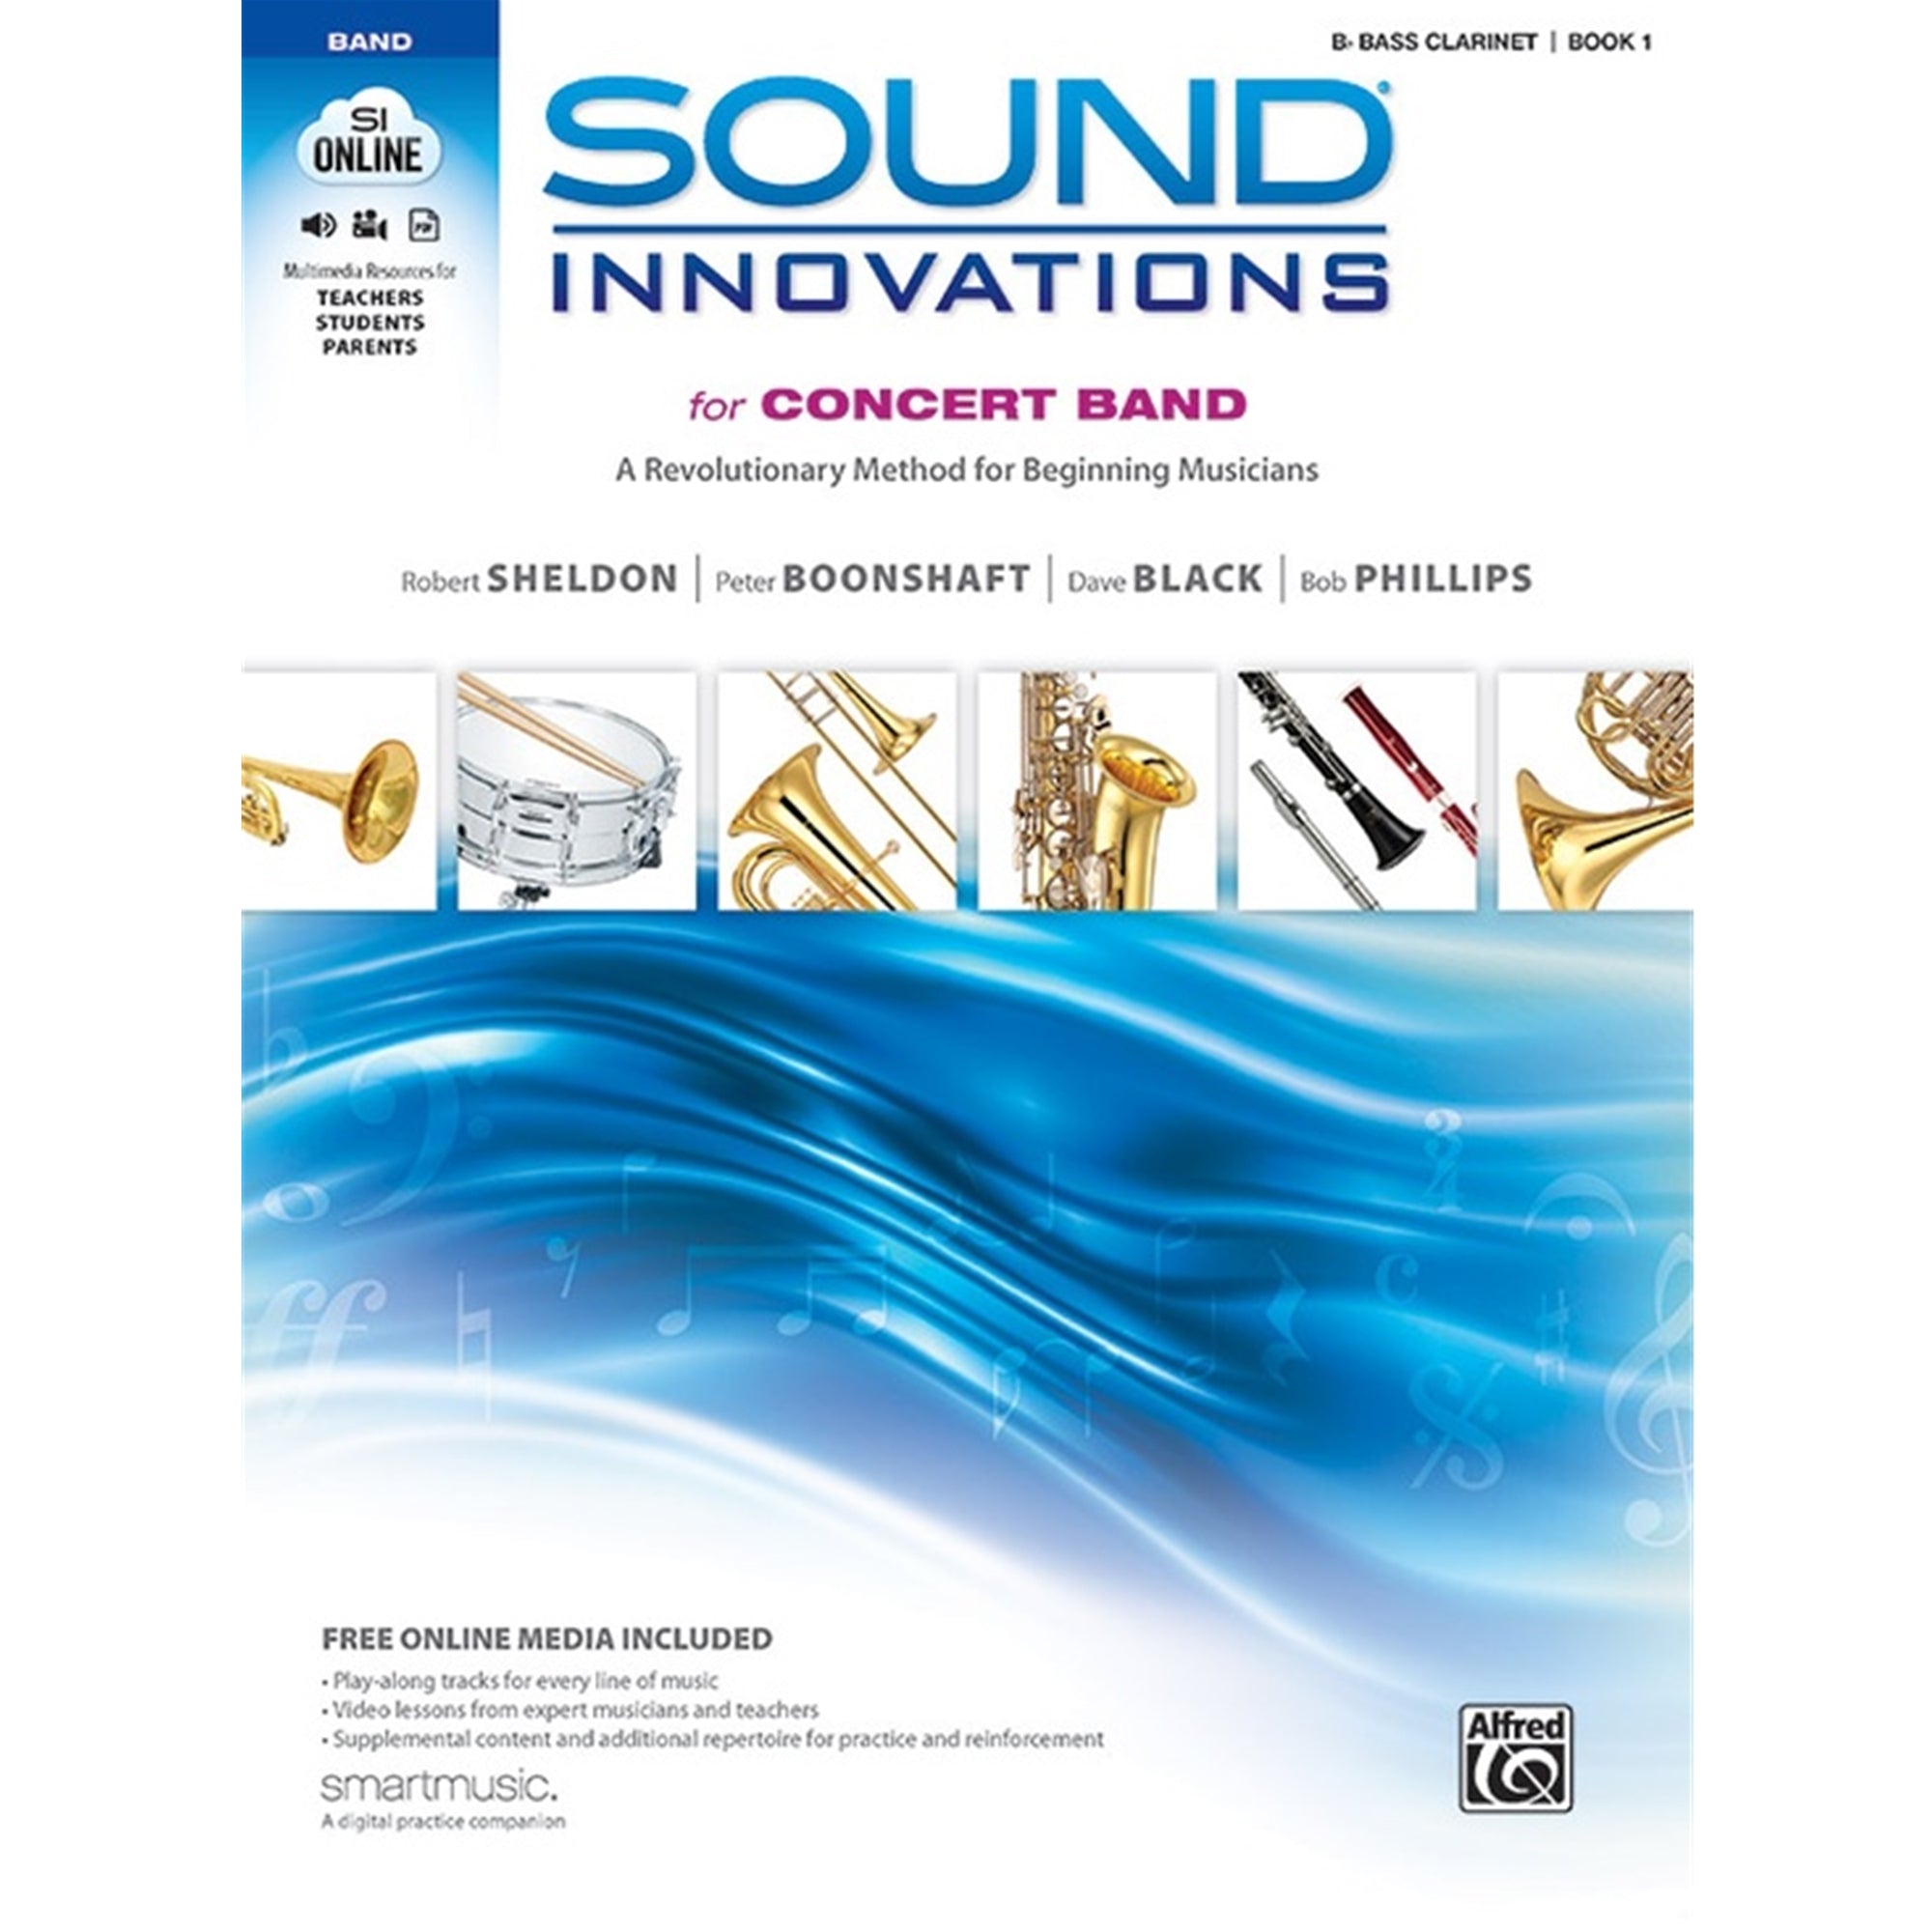 ALFRED 34532 Sound Innovations for Concert Band Book1 for B-flat Bass Clarinet